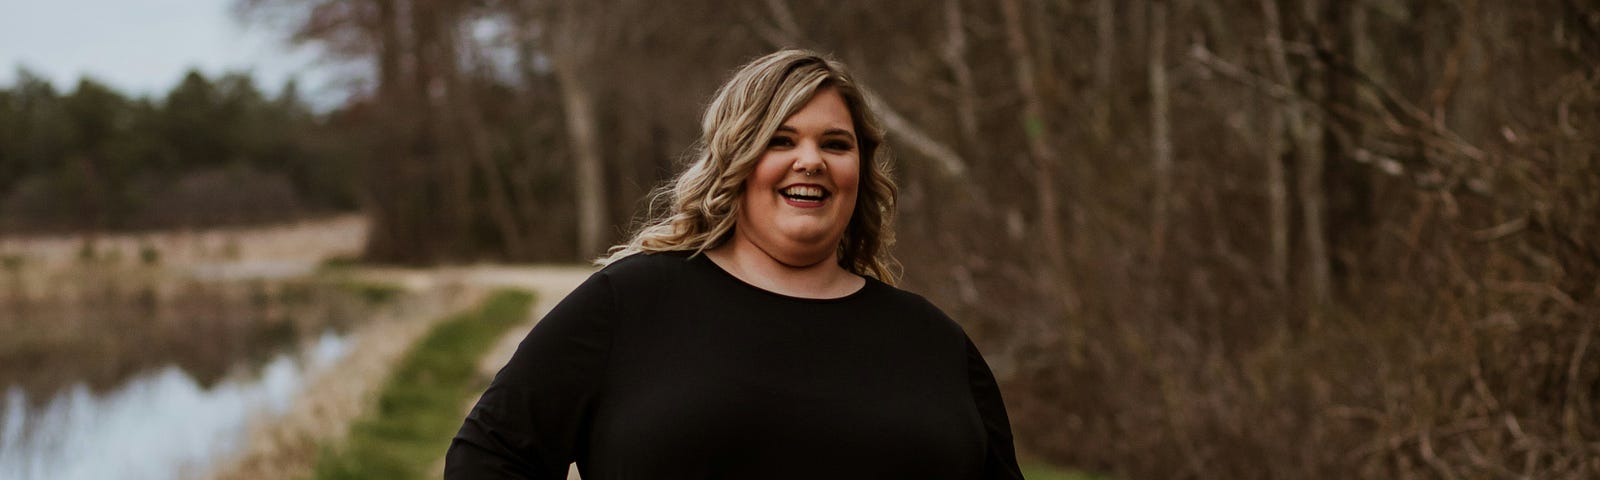 A smiling fat woman in a black dress.